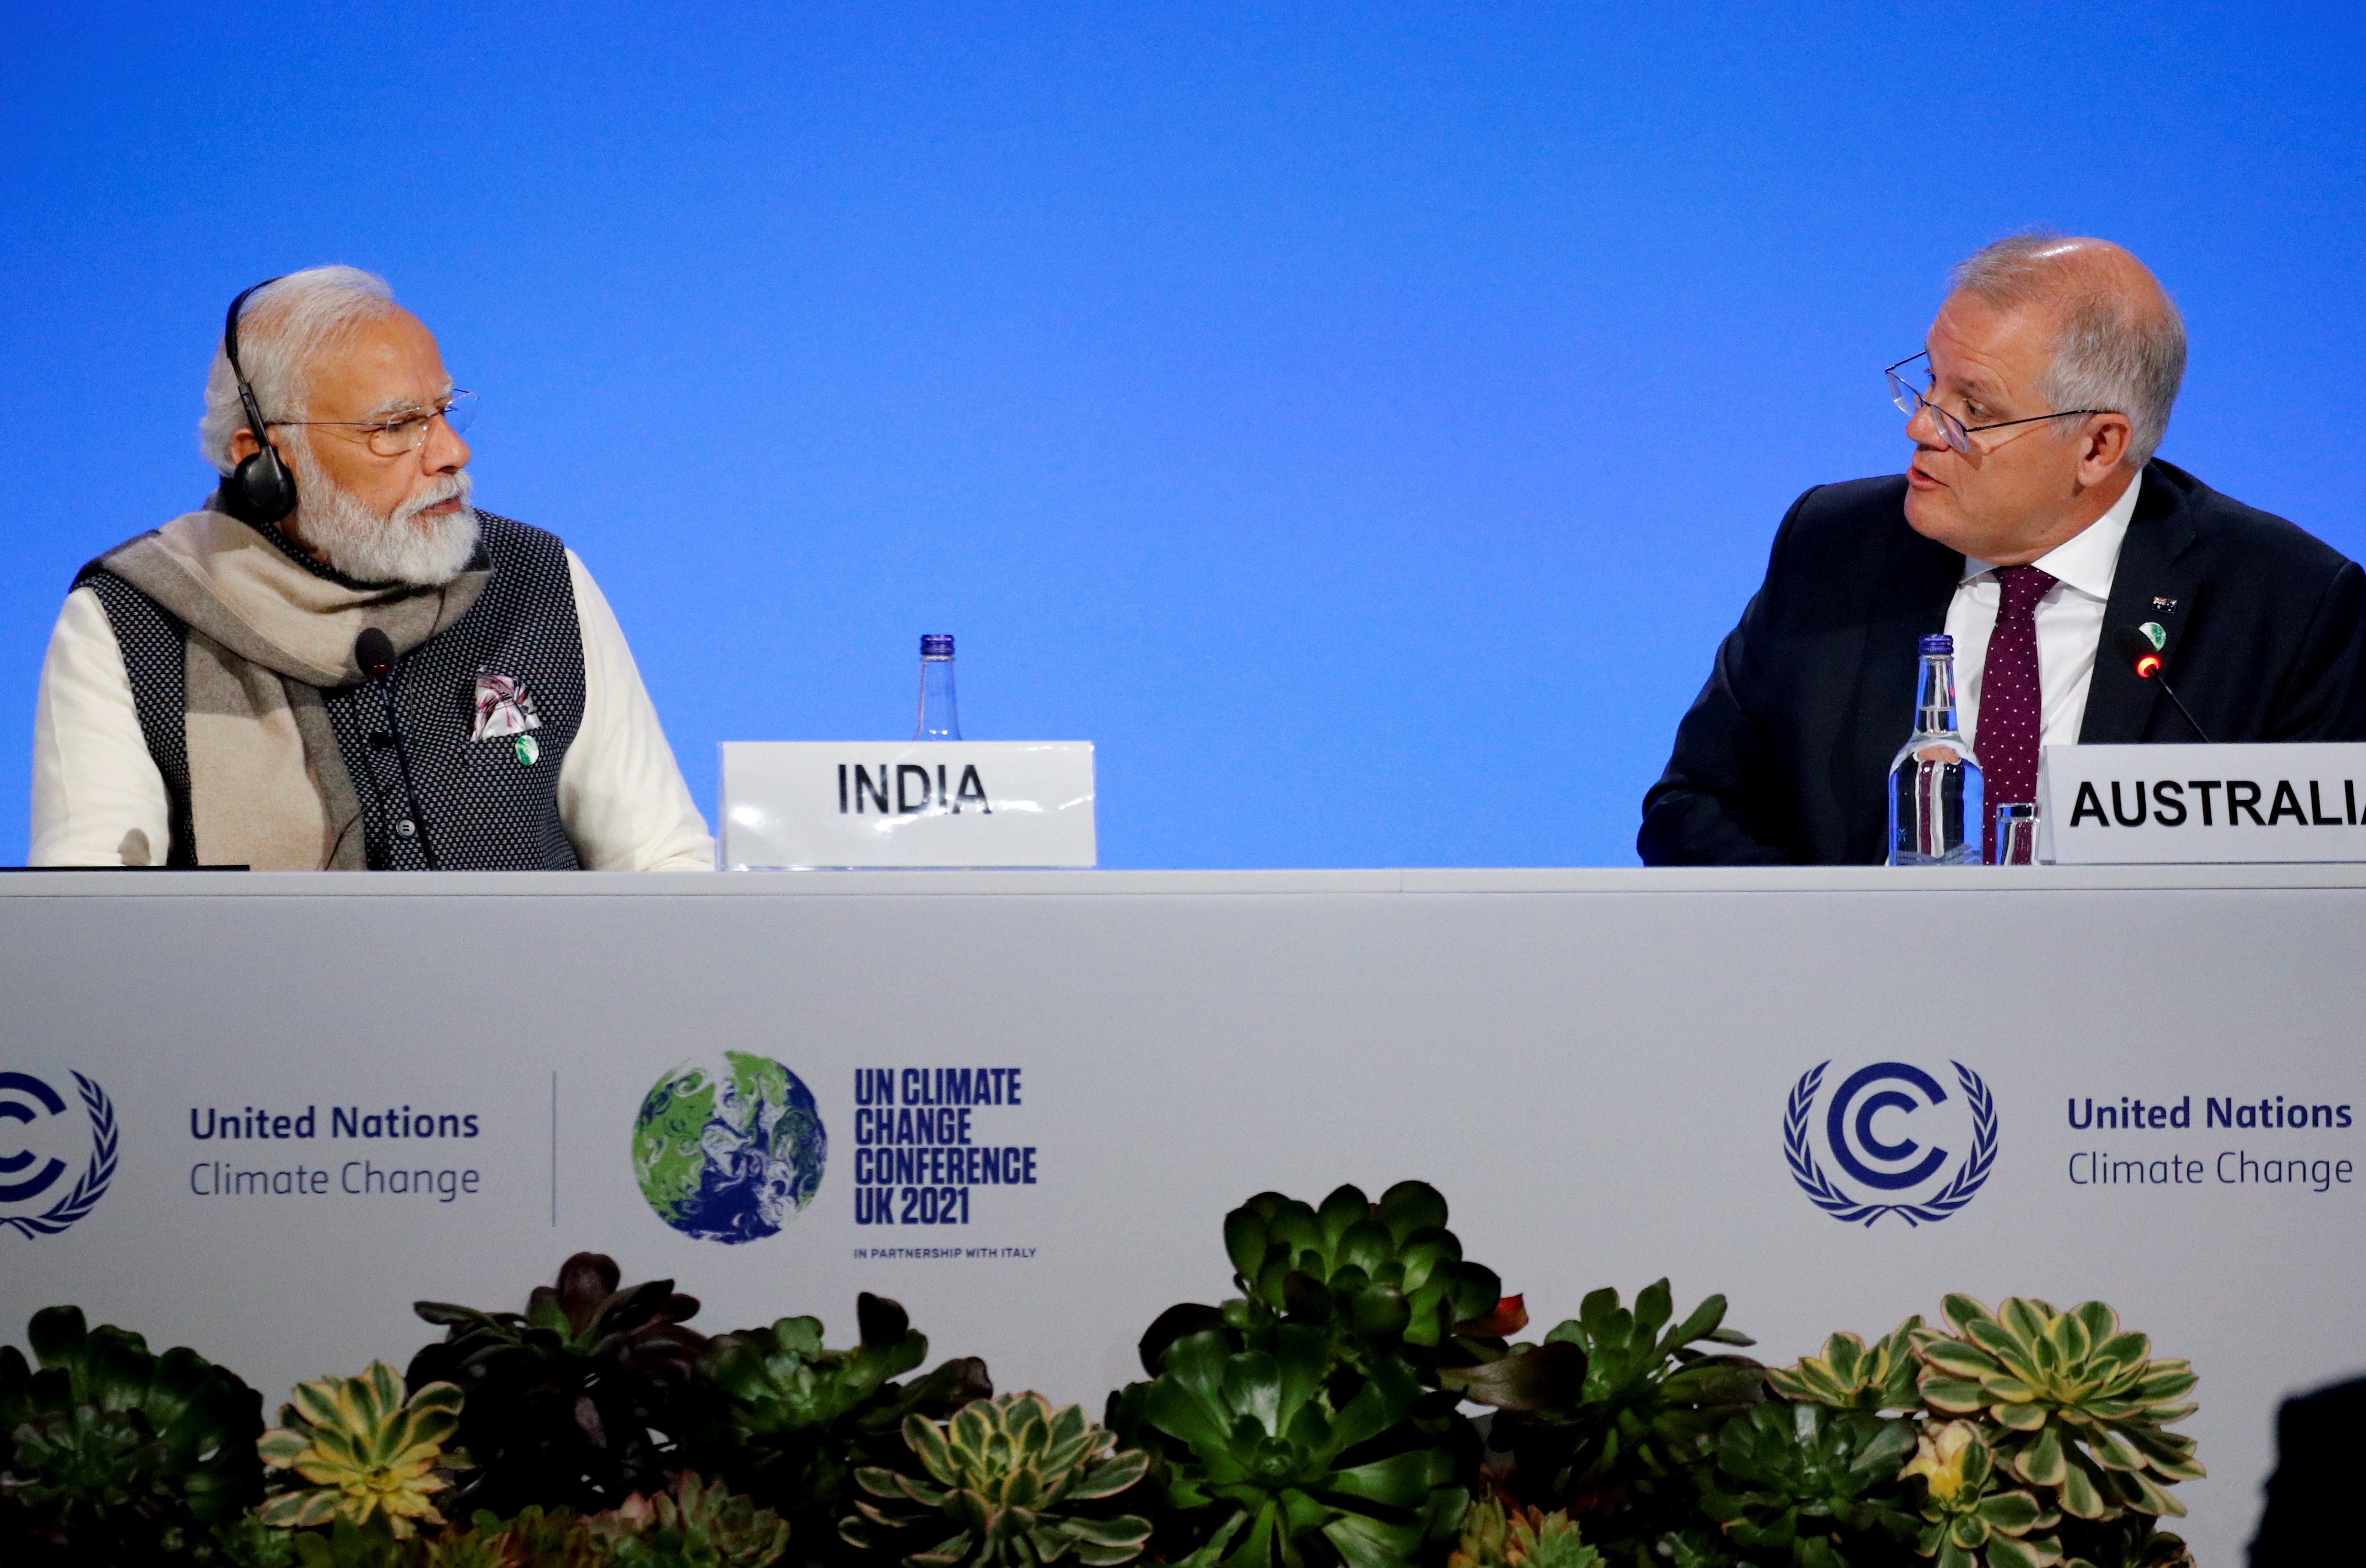 The Prime Minister of India Narendra Modi and the Prime Minister of Australia Scott Morrison attended the meeting of the United Nations Climate Change Conference (COP26) on November 2, 2021 in Glasgow, Scotland.  REUTERS / Phil Noble / Pool